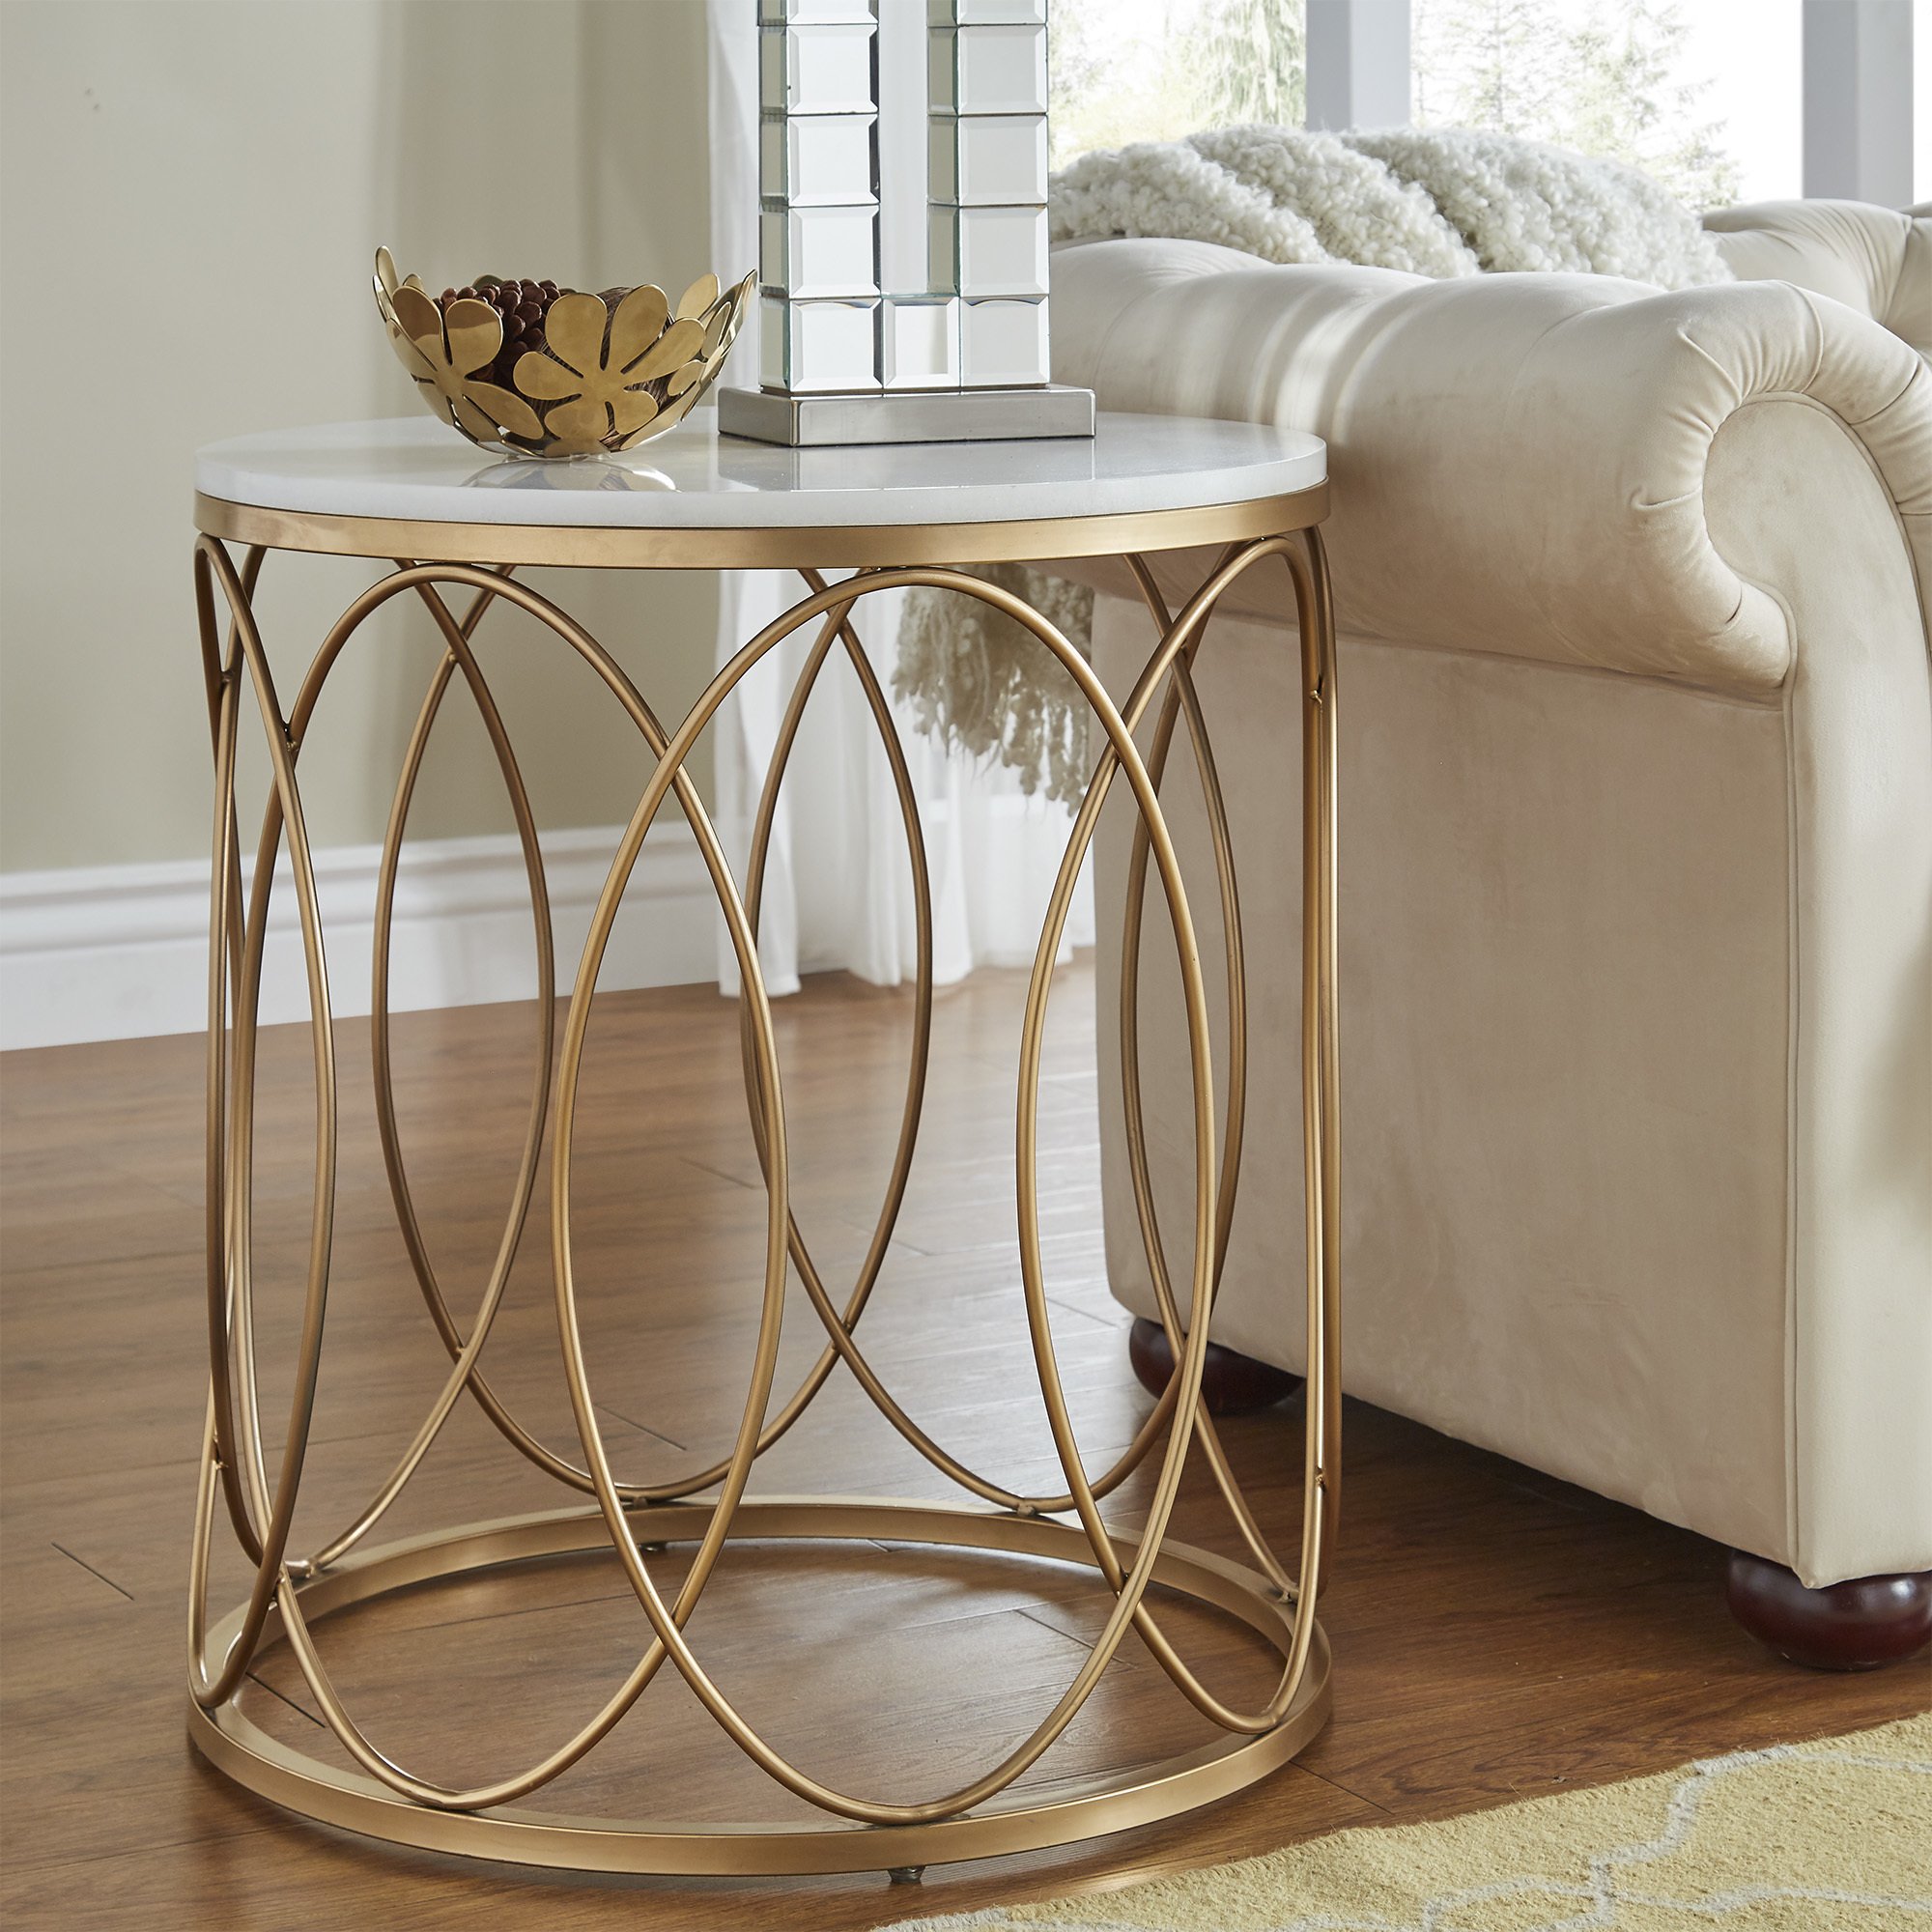 lynn round gold end table with marble top inspire bold accent free shipping today teak garden side dining cover set target mirror room essentials area rug windham cabinet teal